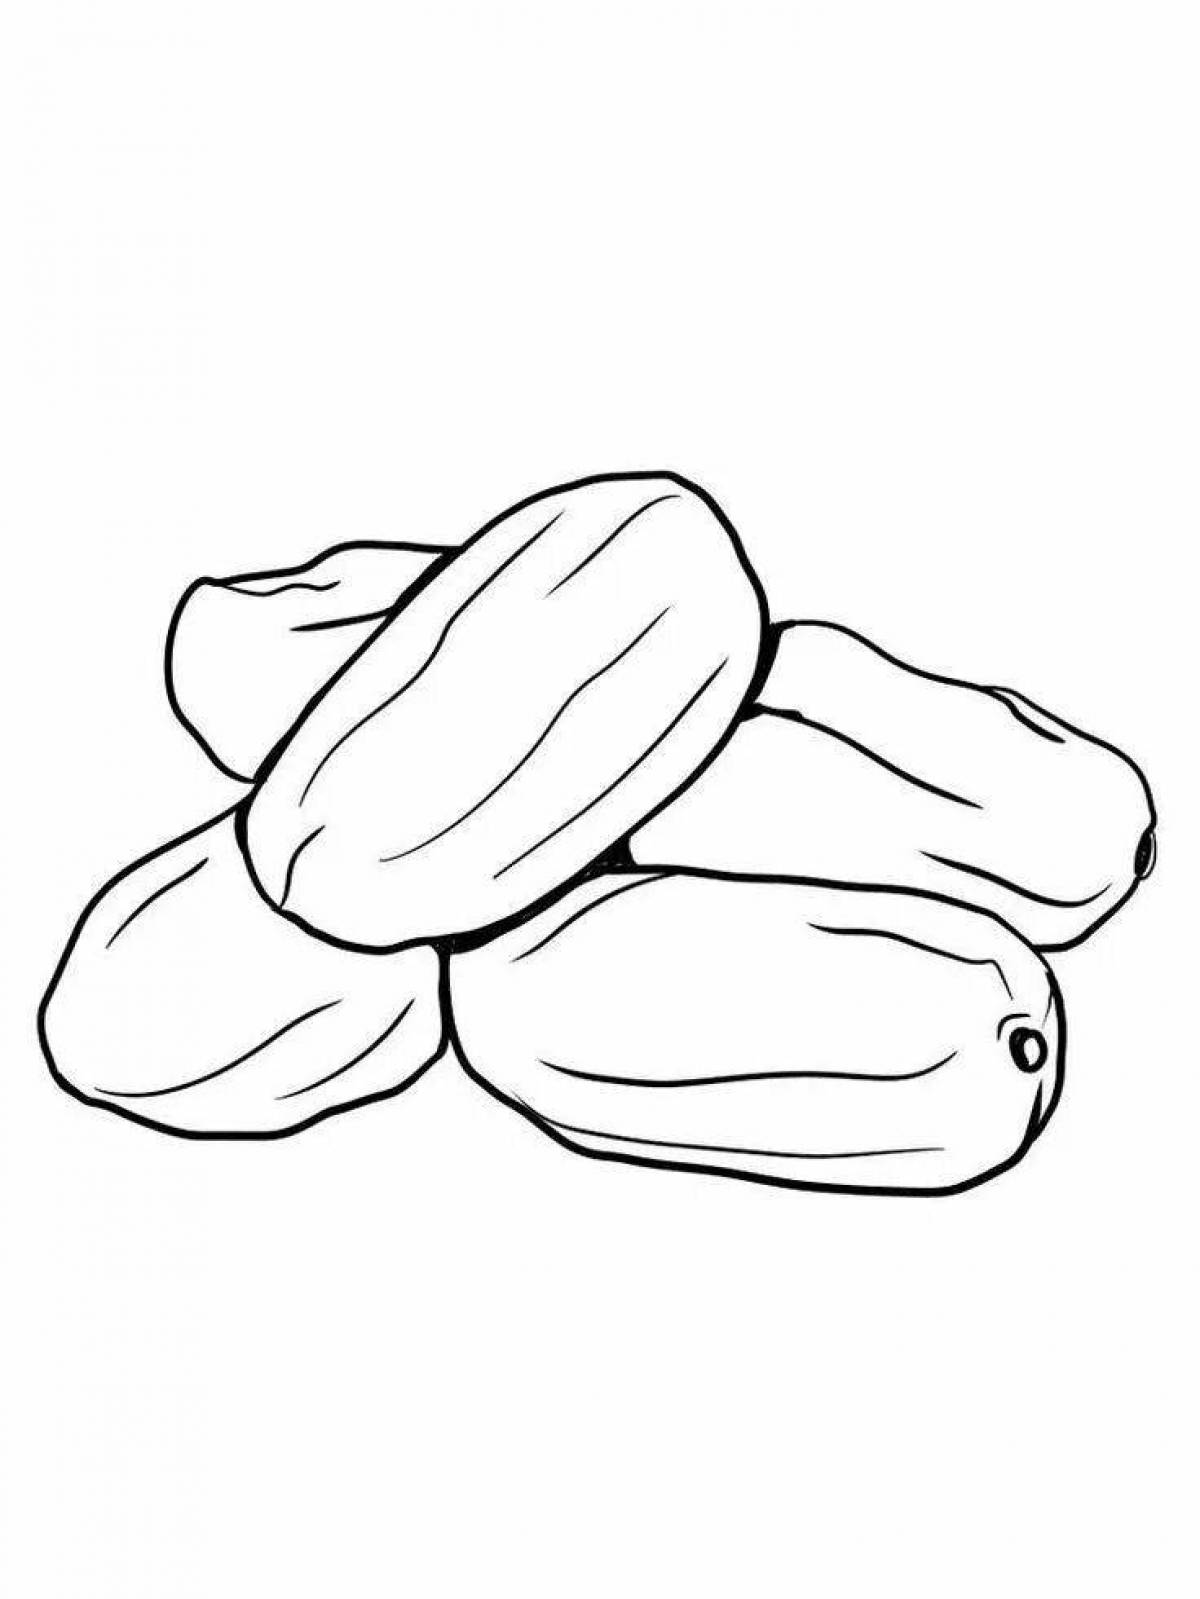 Exciting date fruit coloring page